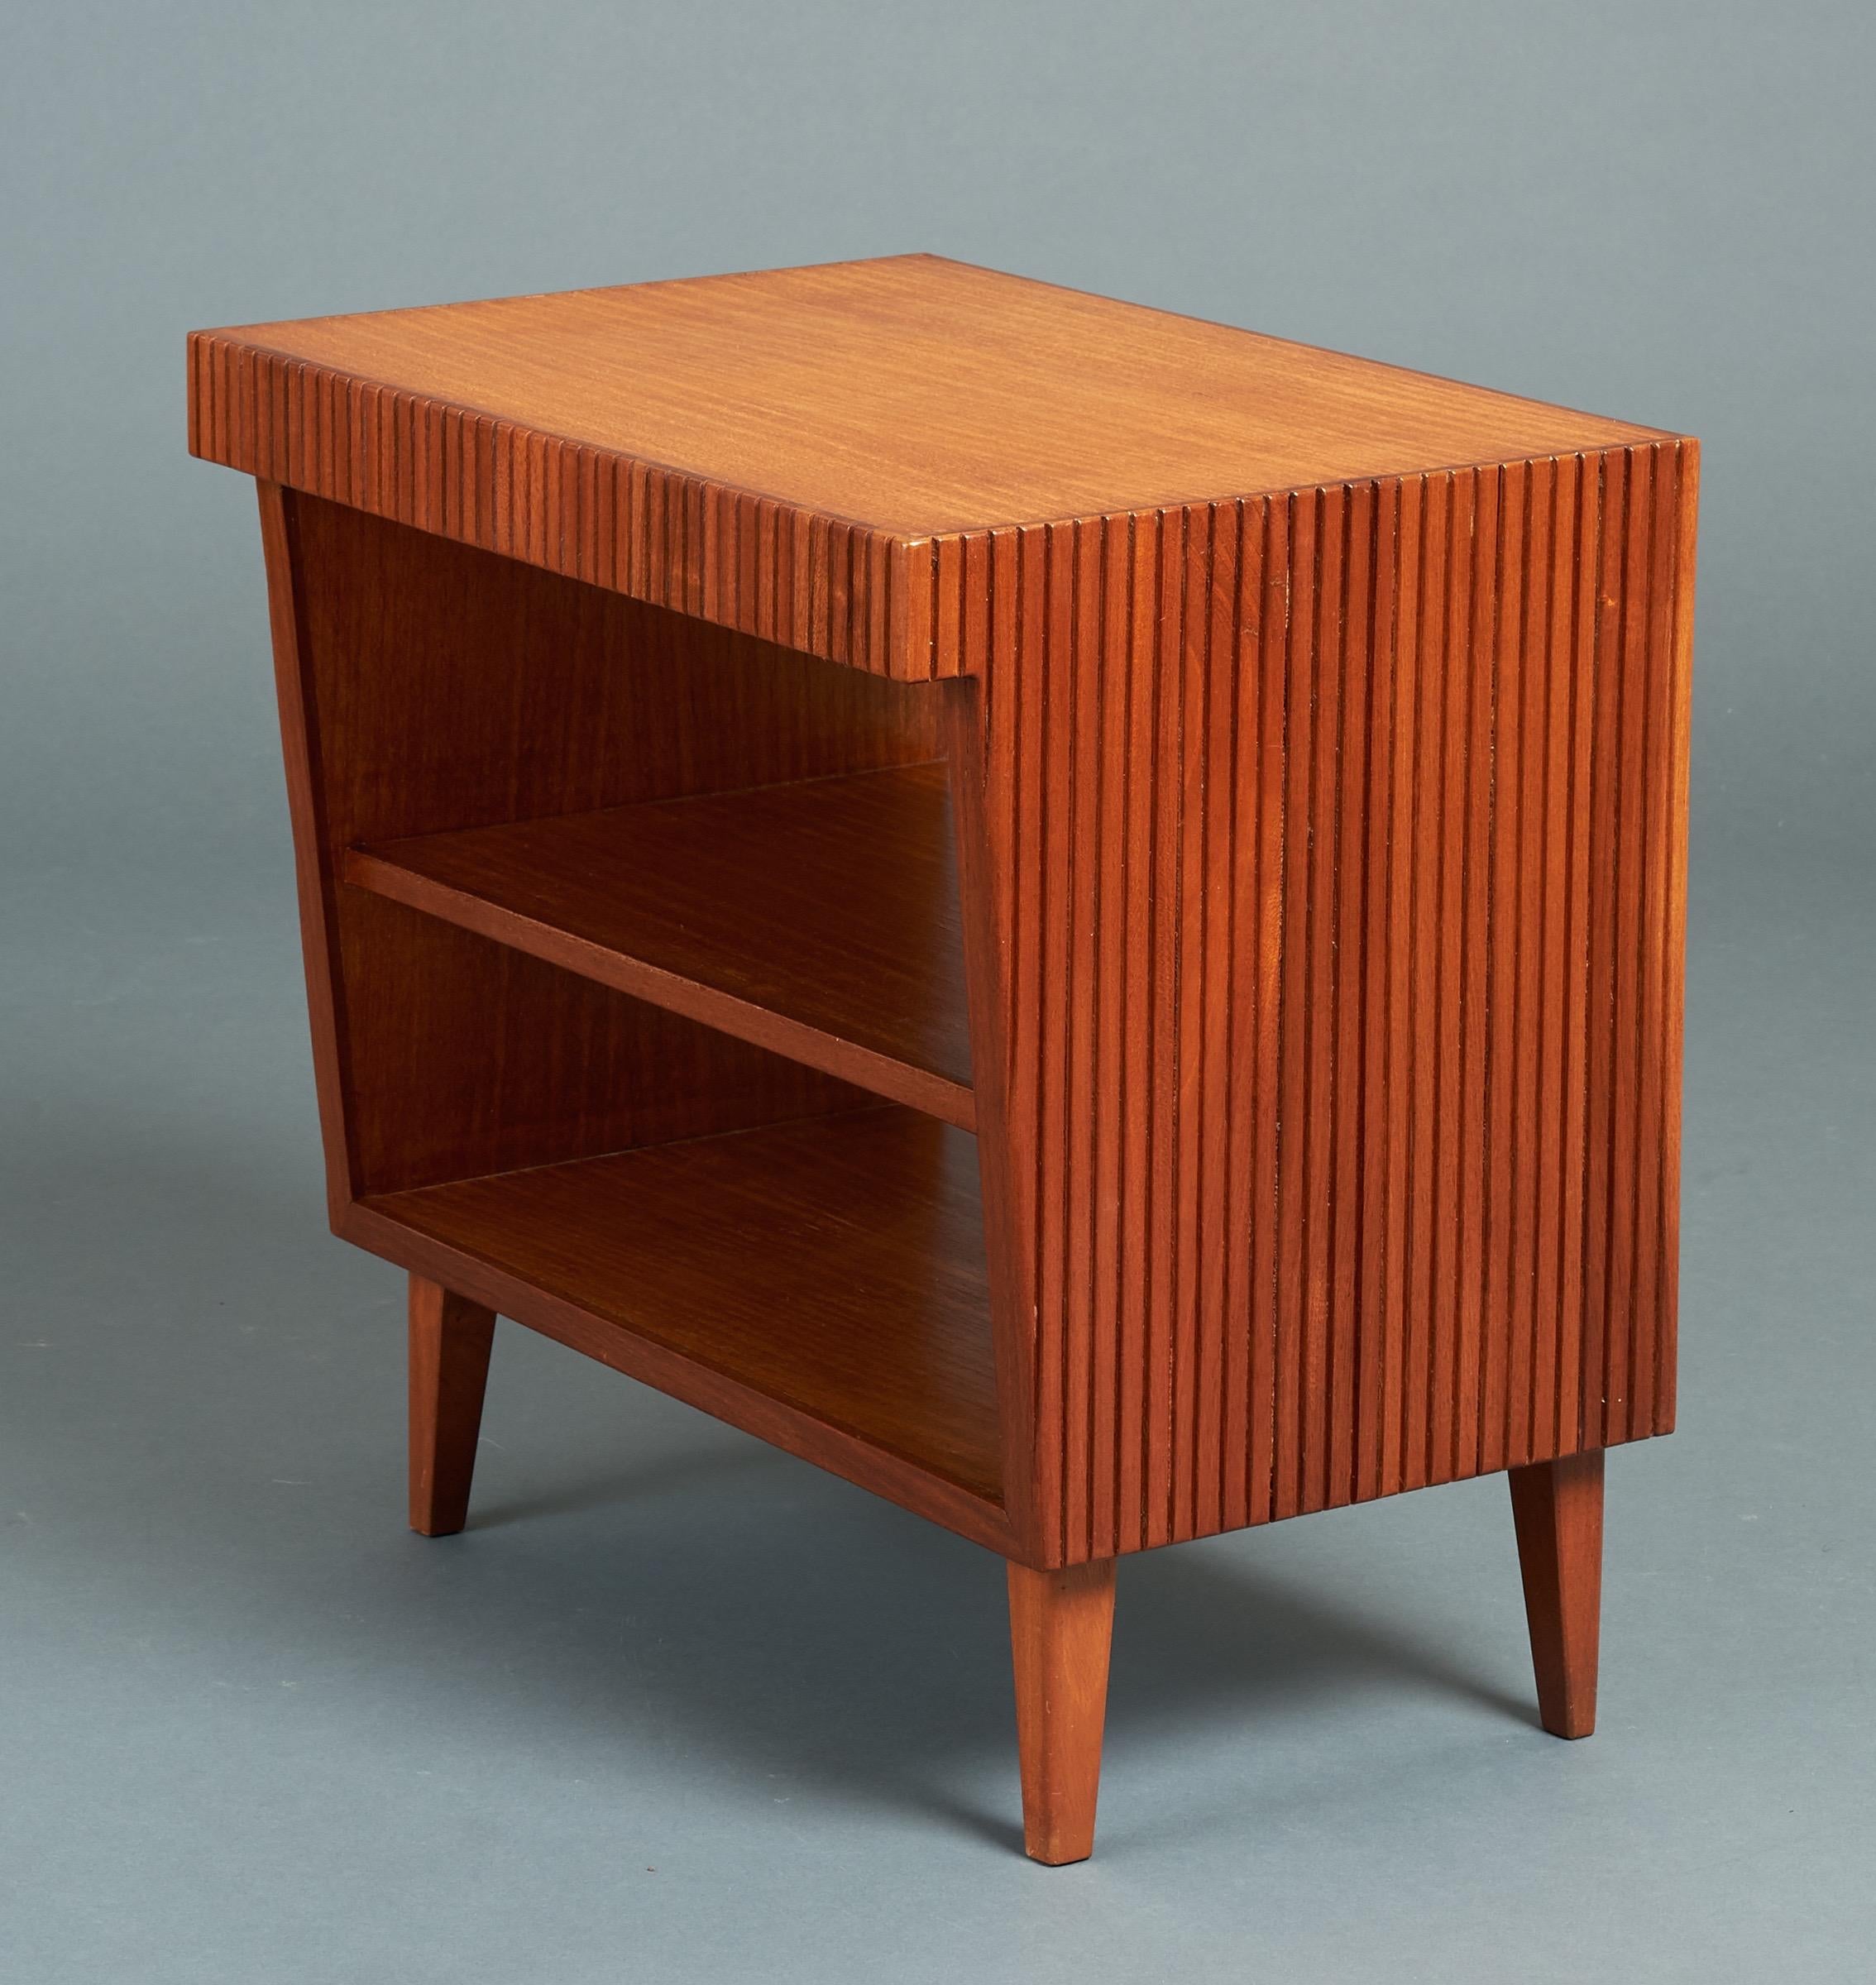 Gio Ponti, End Table with Bookshelves in Reeded Mahogany, Desk Set, Italy, 1950s (Italienisch)